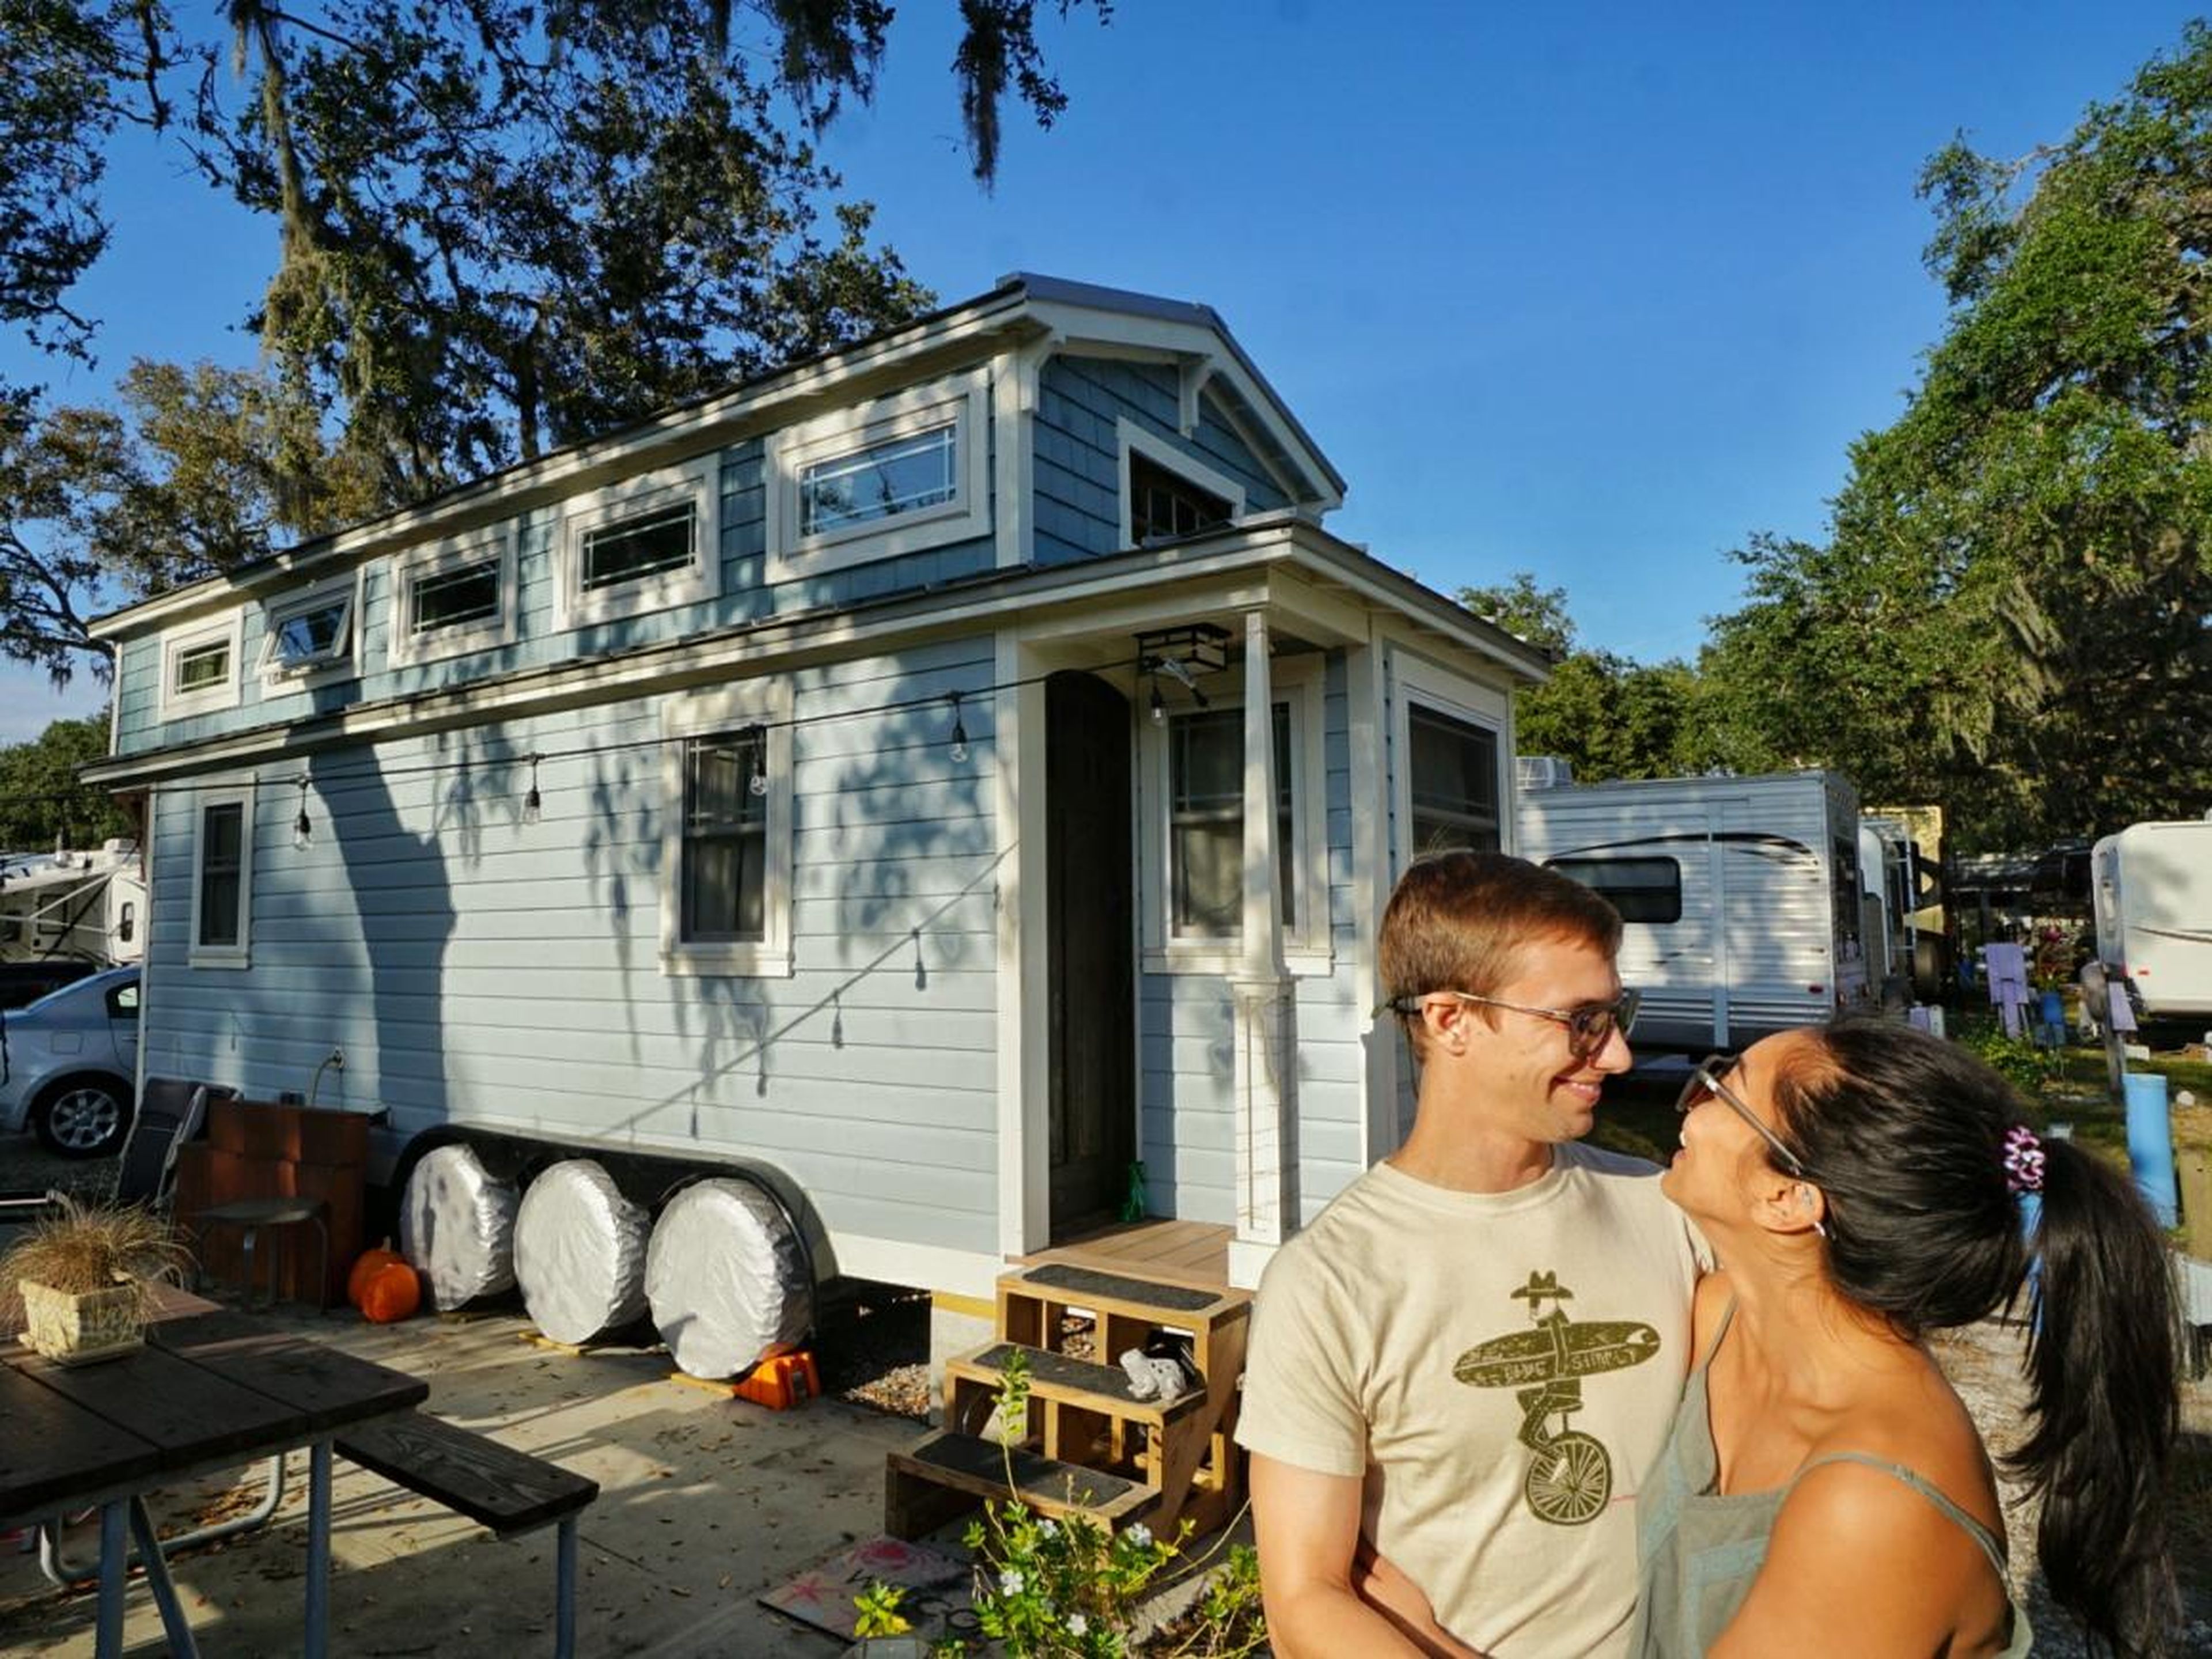 Tim and Sam of Tiffany the Tiny Home bought their tiny home instead of building it. "The preparation process was really just downsizing and mentally preparing to live in less space," they told Business Insider.